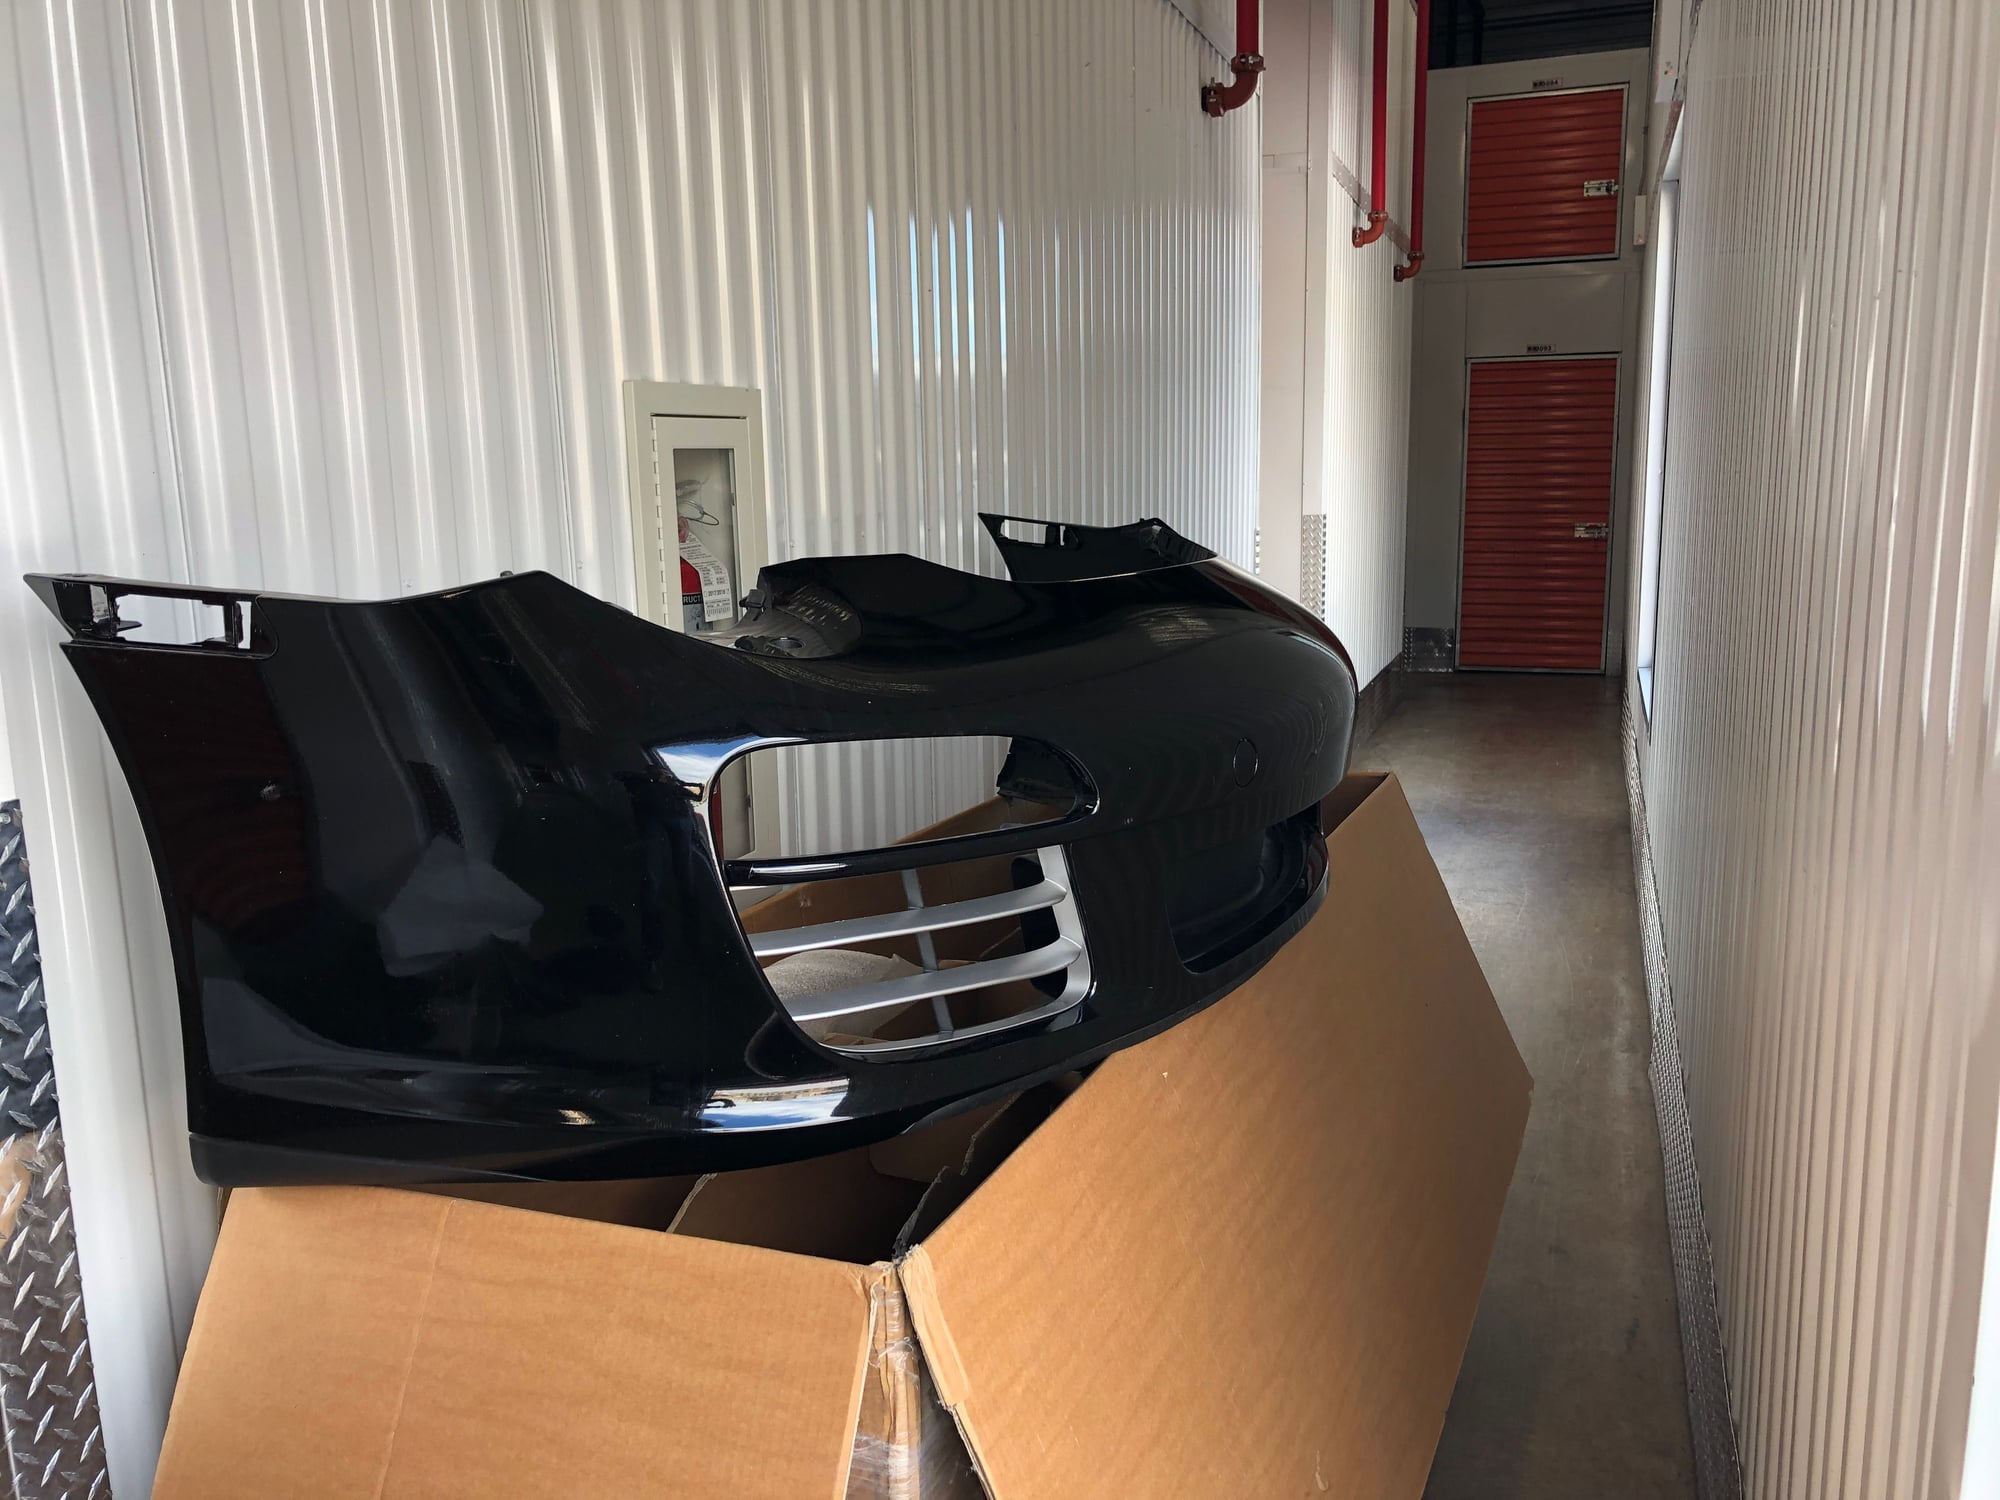 Exterior Body Parts - OEM Original PORSCHE 997.2 FRONT BUMPER Tackoff Black Original Paint protected by PPF - Used - 2009 to 2012 Porsche 911 - Bronx, NY 10451, United States